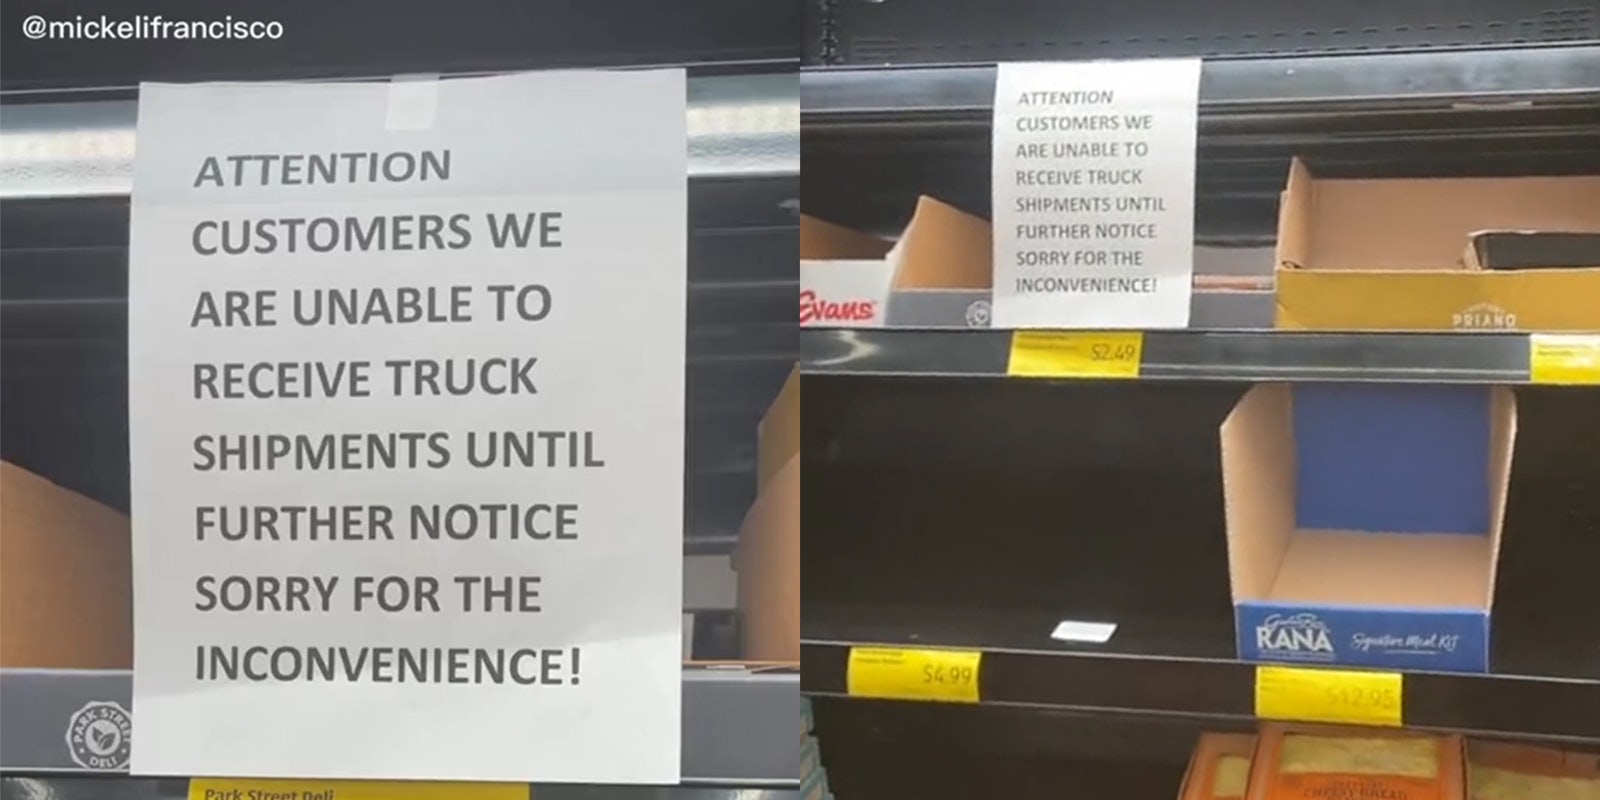 empty shelves with sign that reads 'Attention customers we are unable to receive truck shipments until further notice sorry for the incovnenience!'